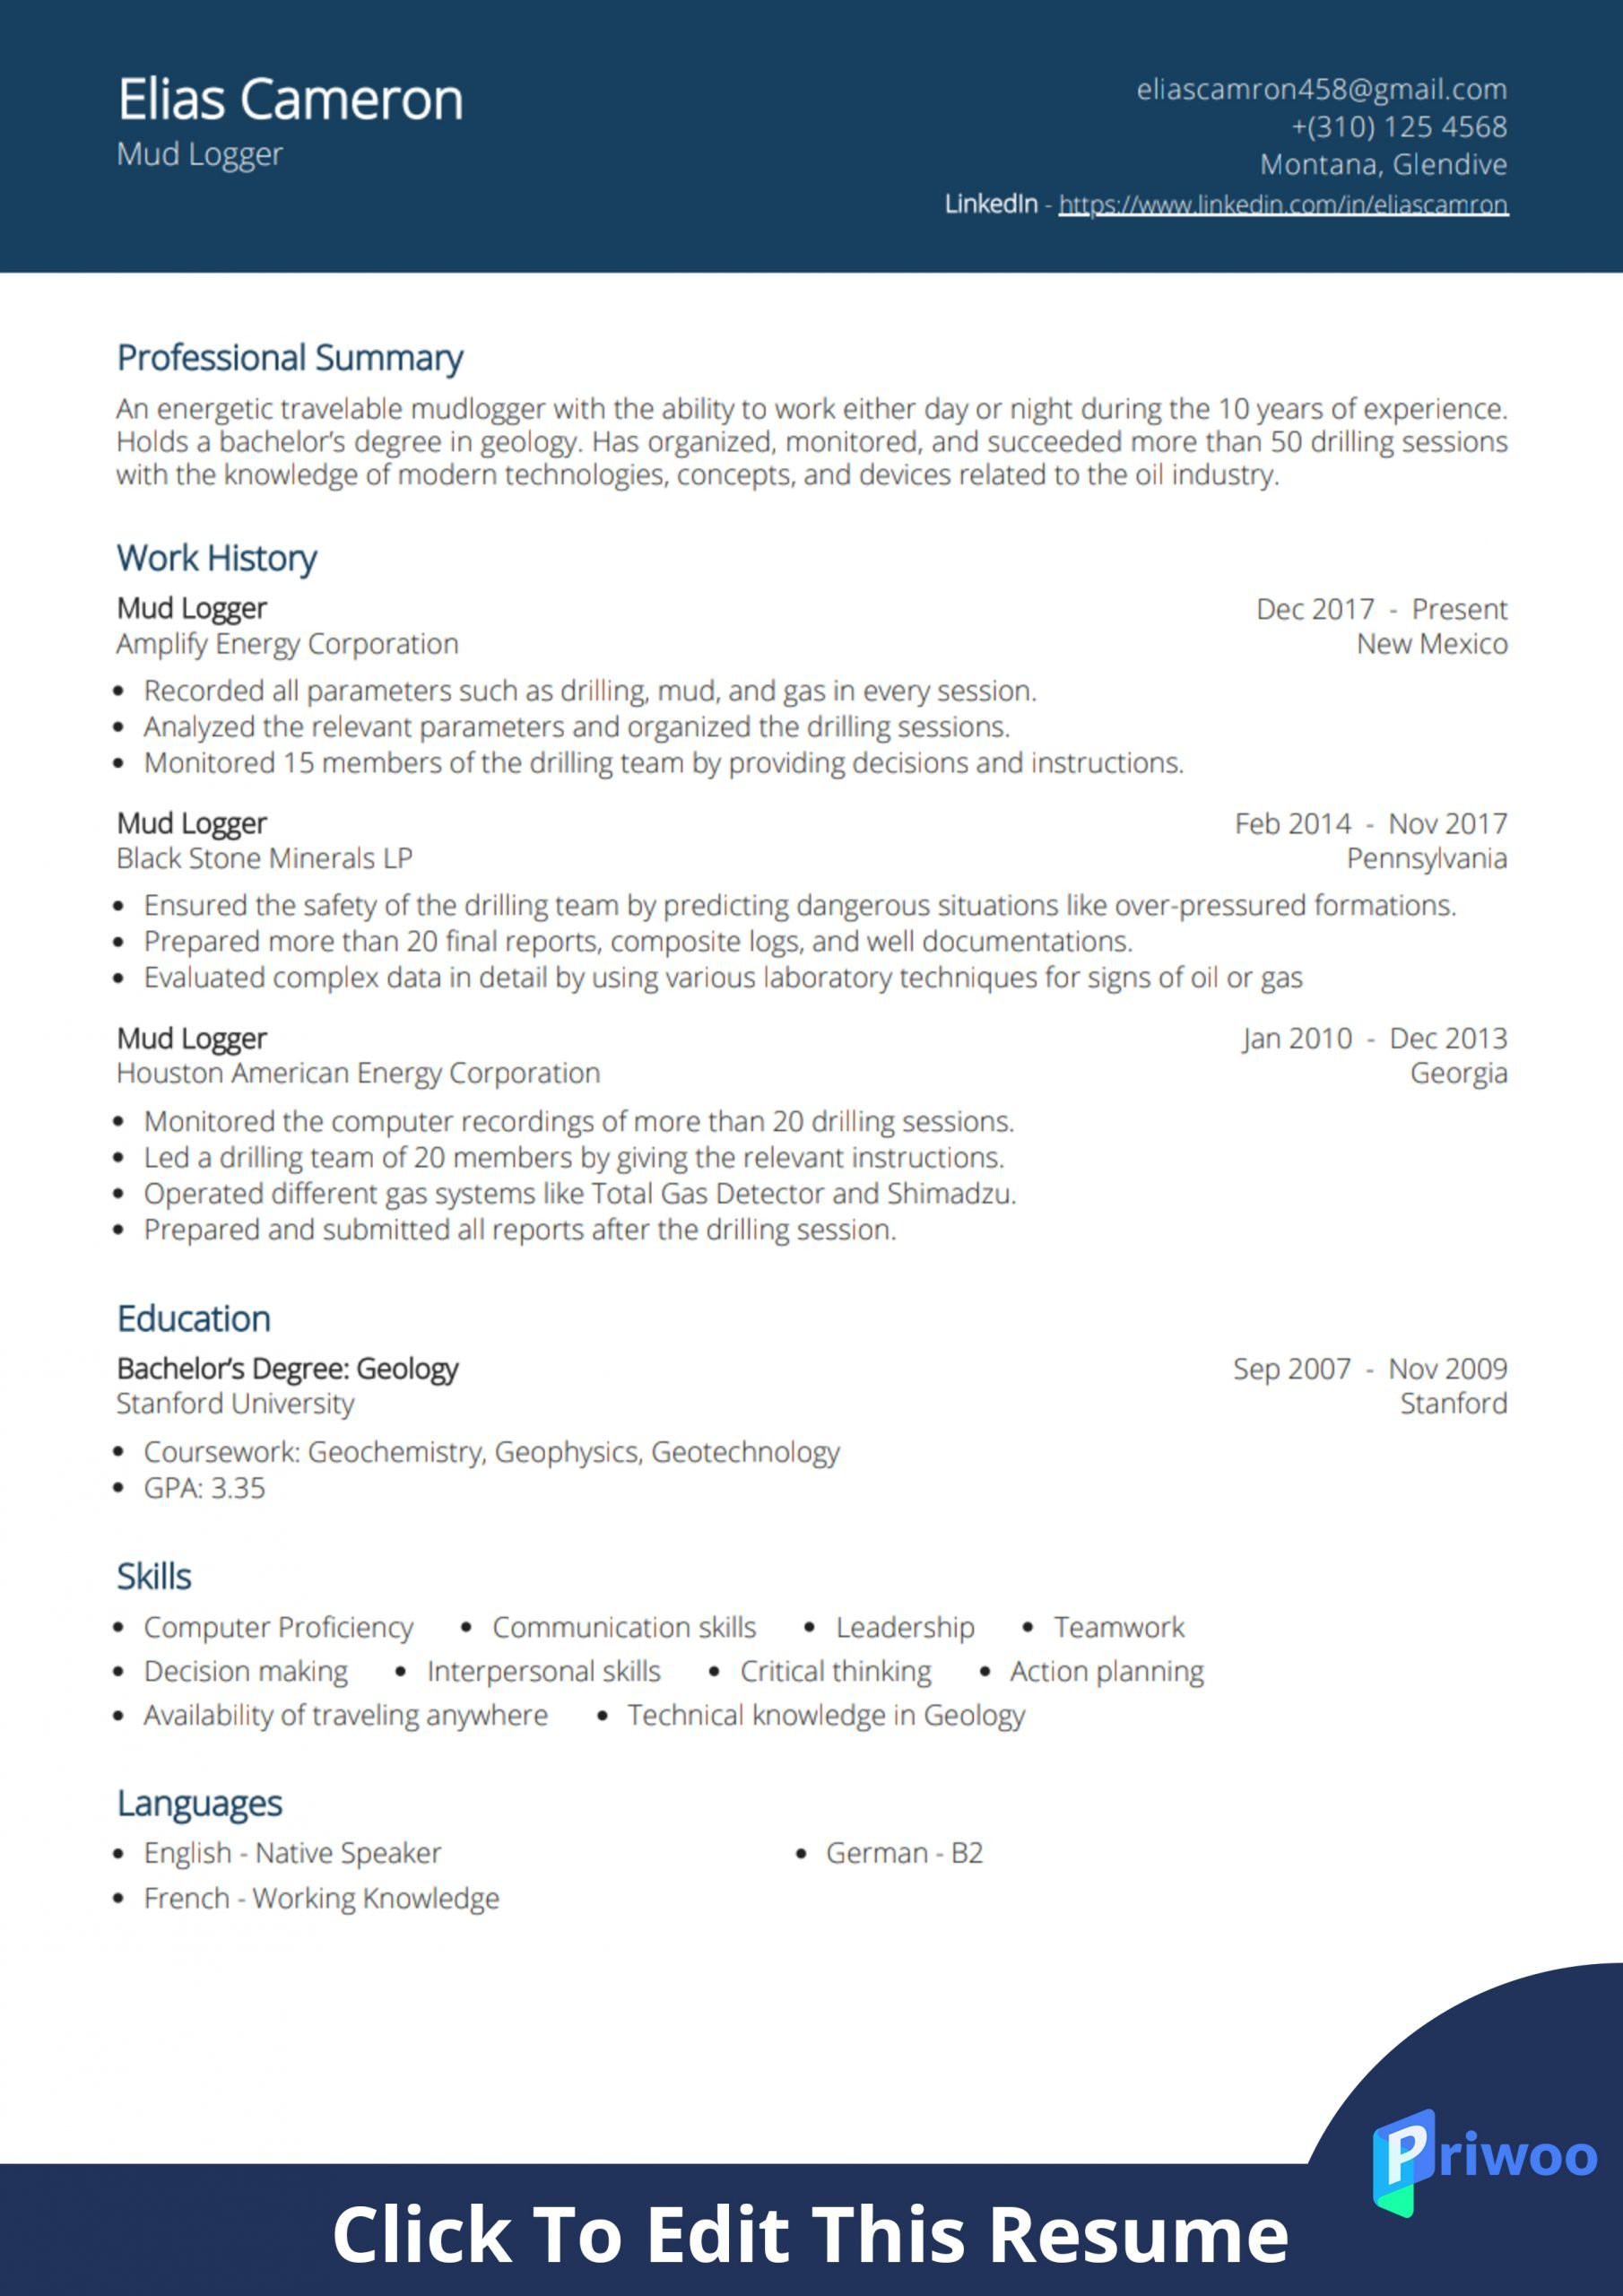 Resume Templates for Oil Field Jobs Mud Logger and Geologist Resume Example Priwoo